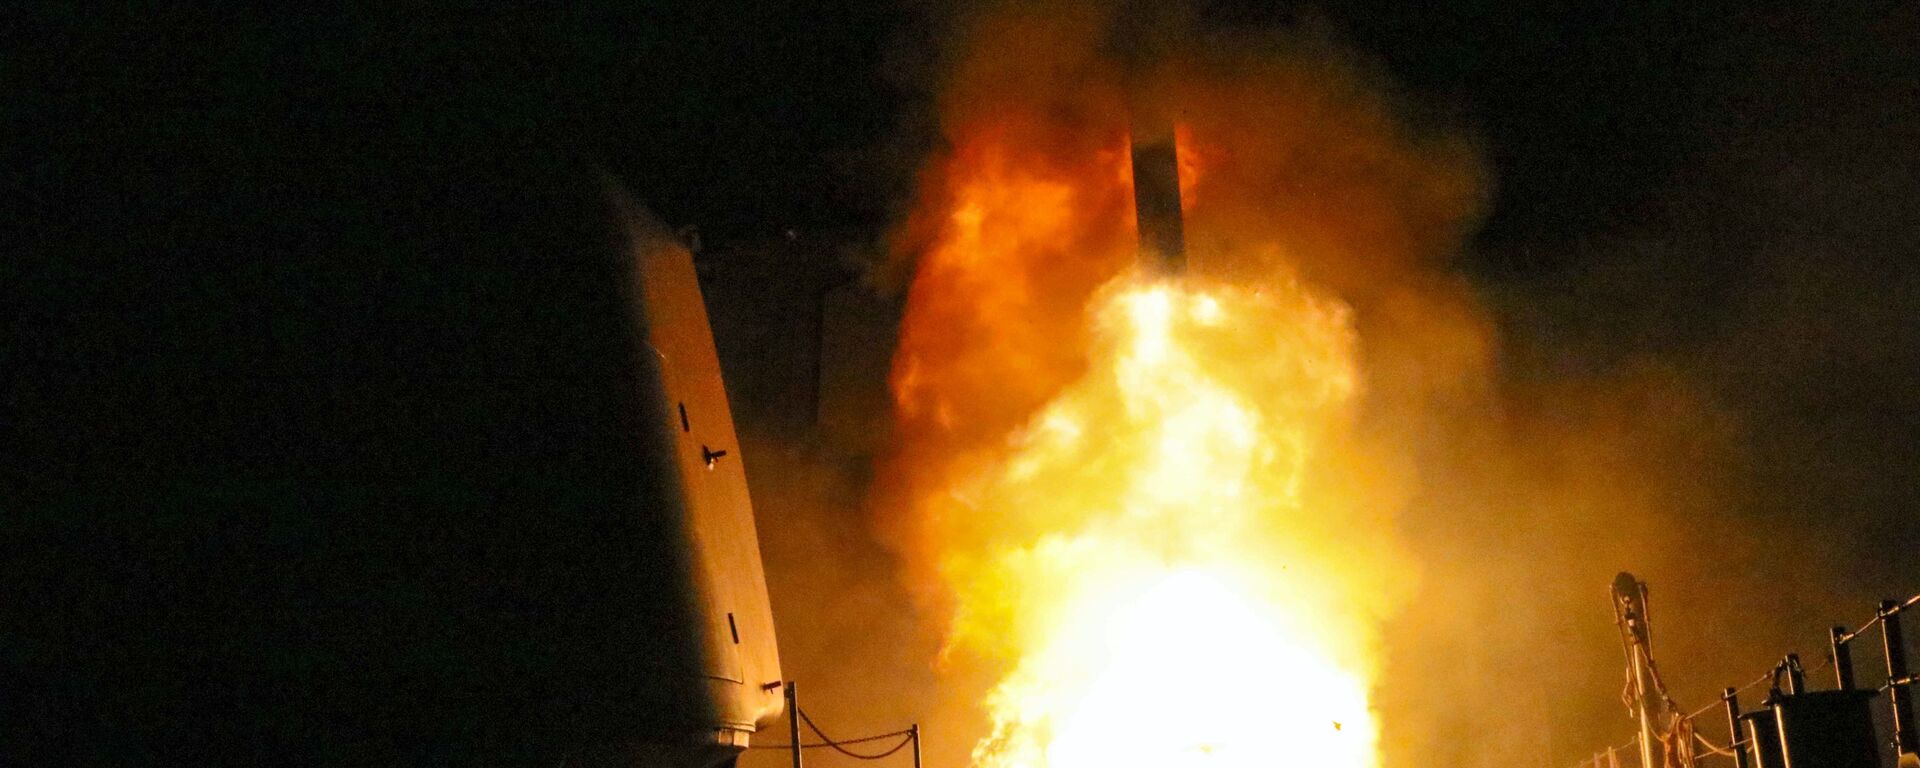 In this image provided by the U.S. Navy, the guided-missile cruiser USS Monterey (CG 61) fires a Tomahawk land attack missile Saturday, April 14, 2018, as part of the military response to Syria's alleged use of chemical weapons on April 7.  - Sputnik International, 1920, 28.10.2022